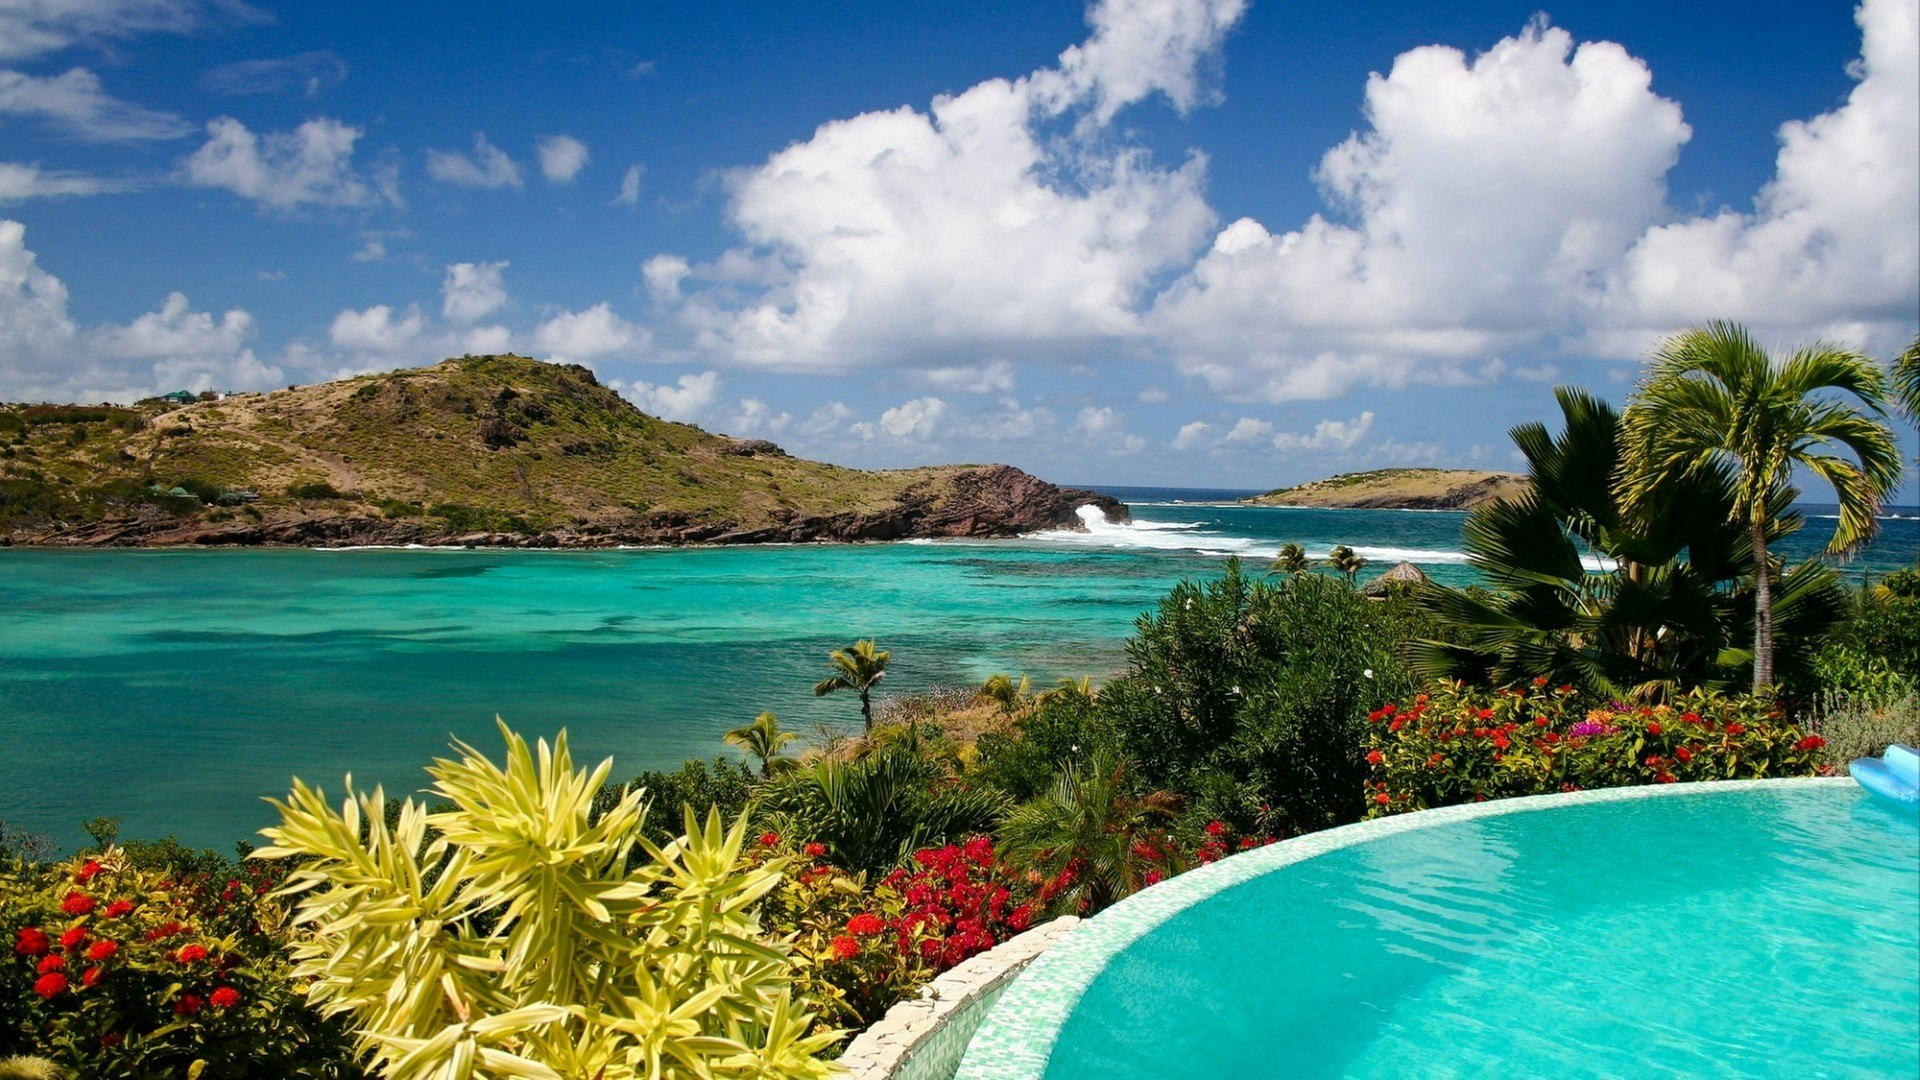 Edge of Pool Overlooking Lagoon on Caribbean Island of St. Barts, French West Indies